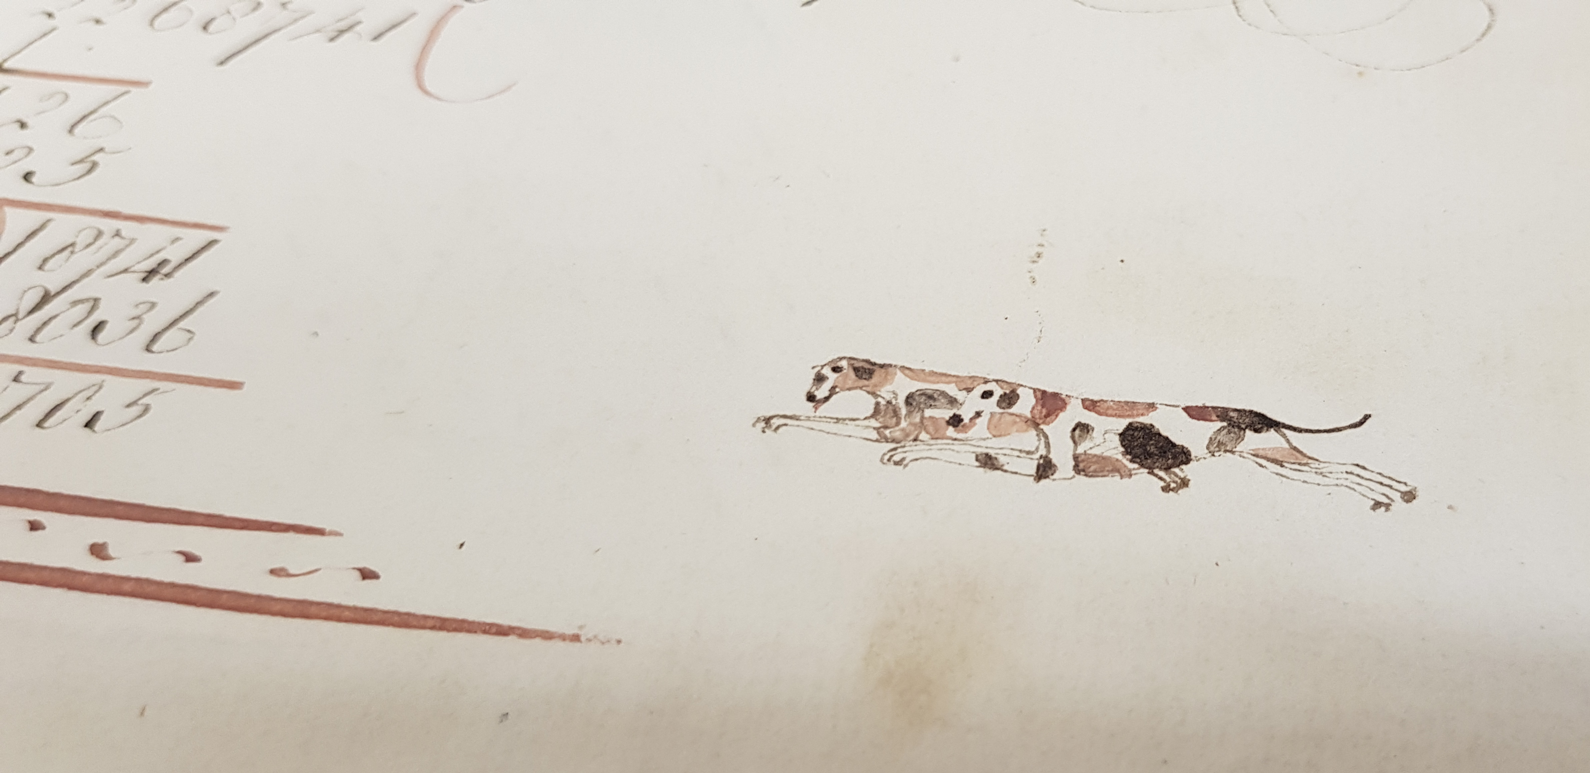 Two dogs running, drawn on a piece of paper